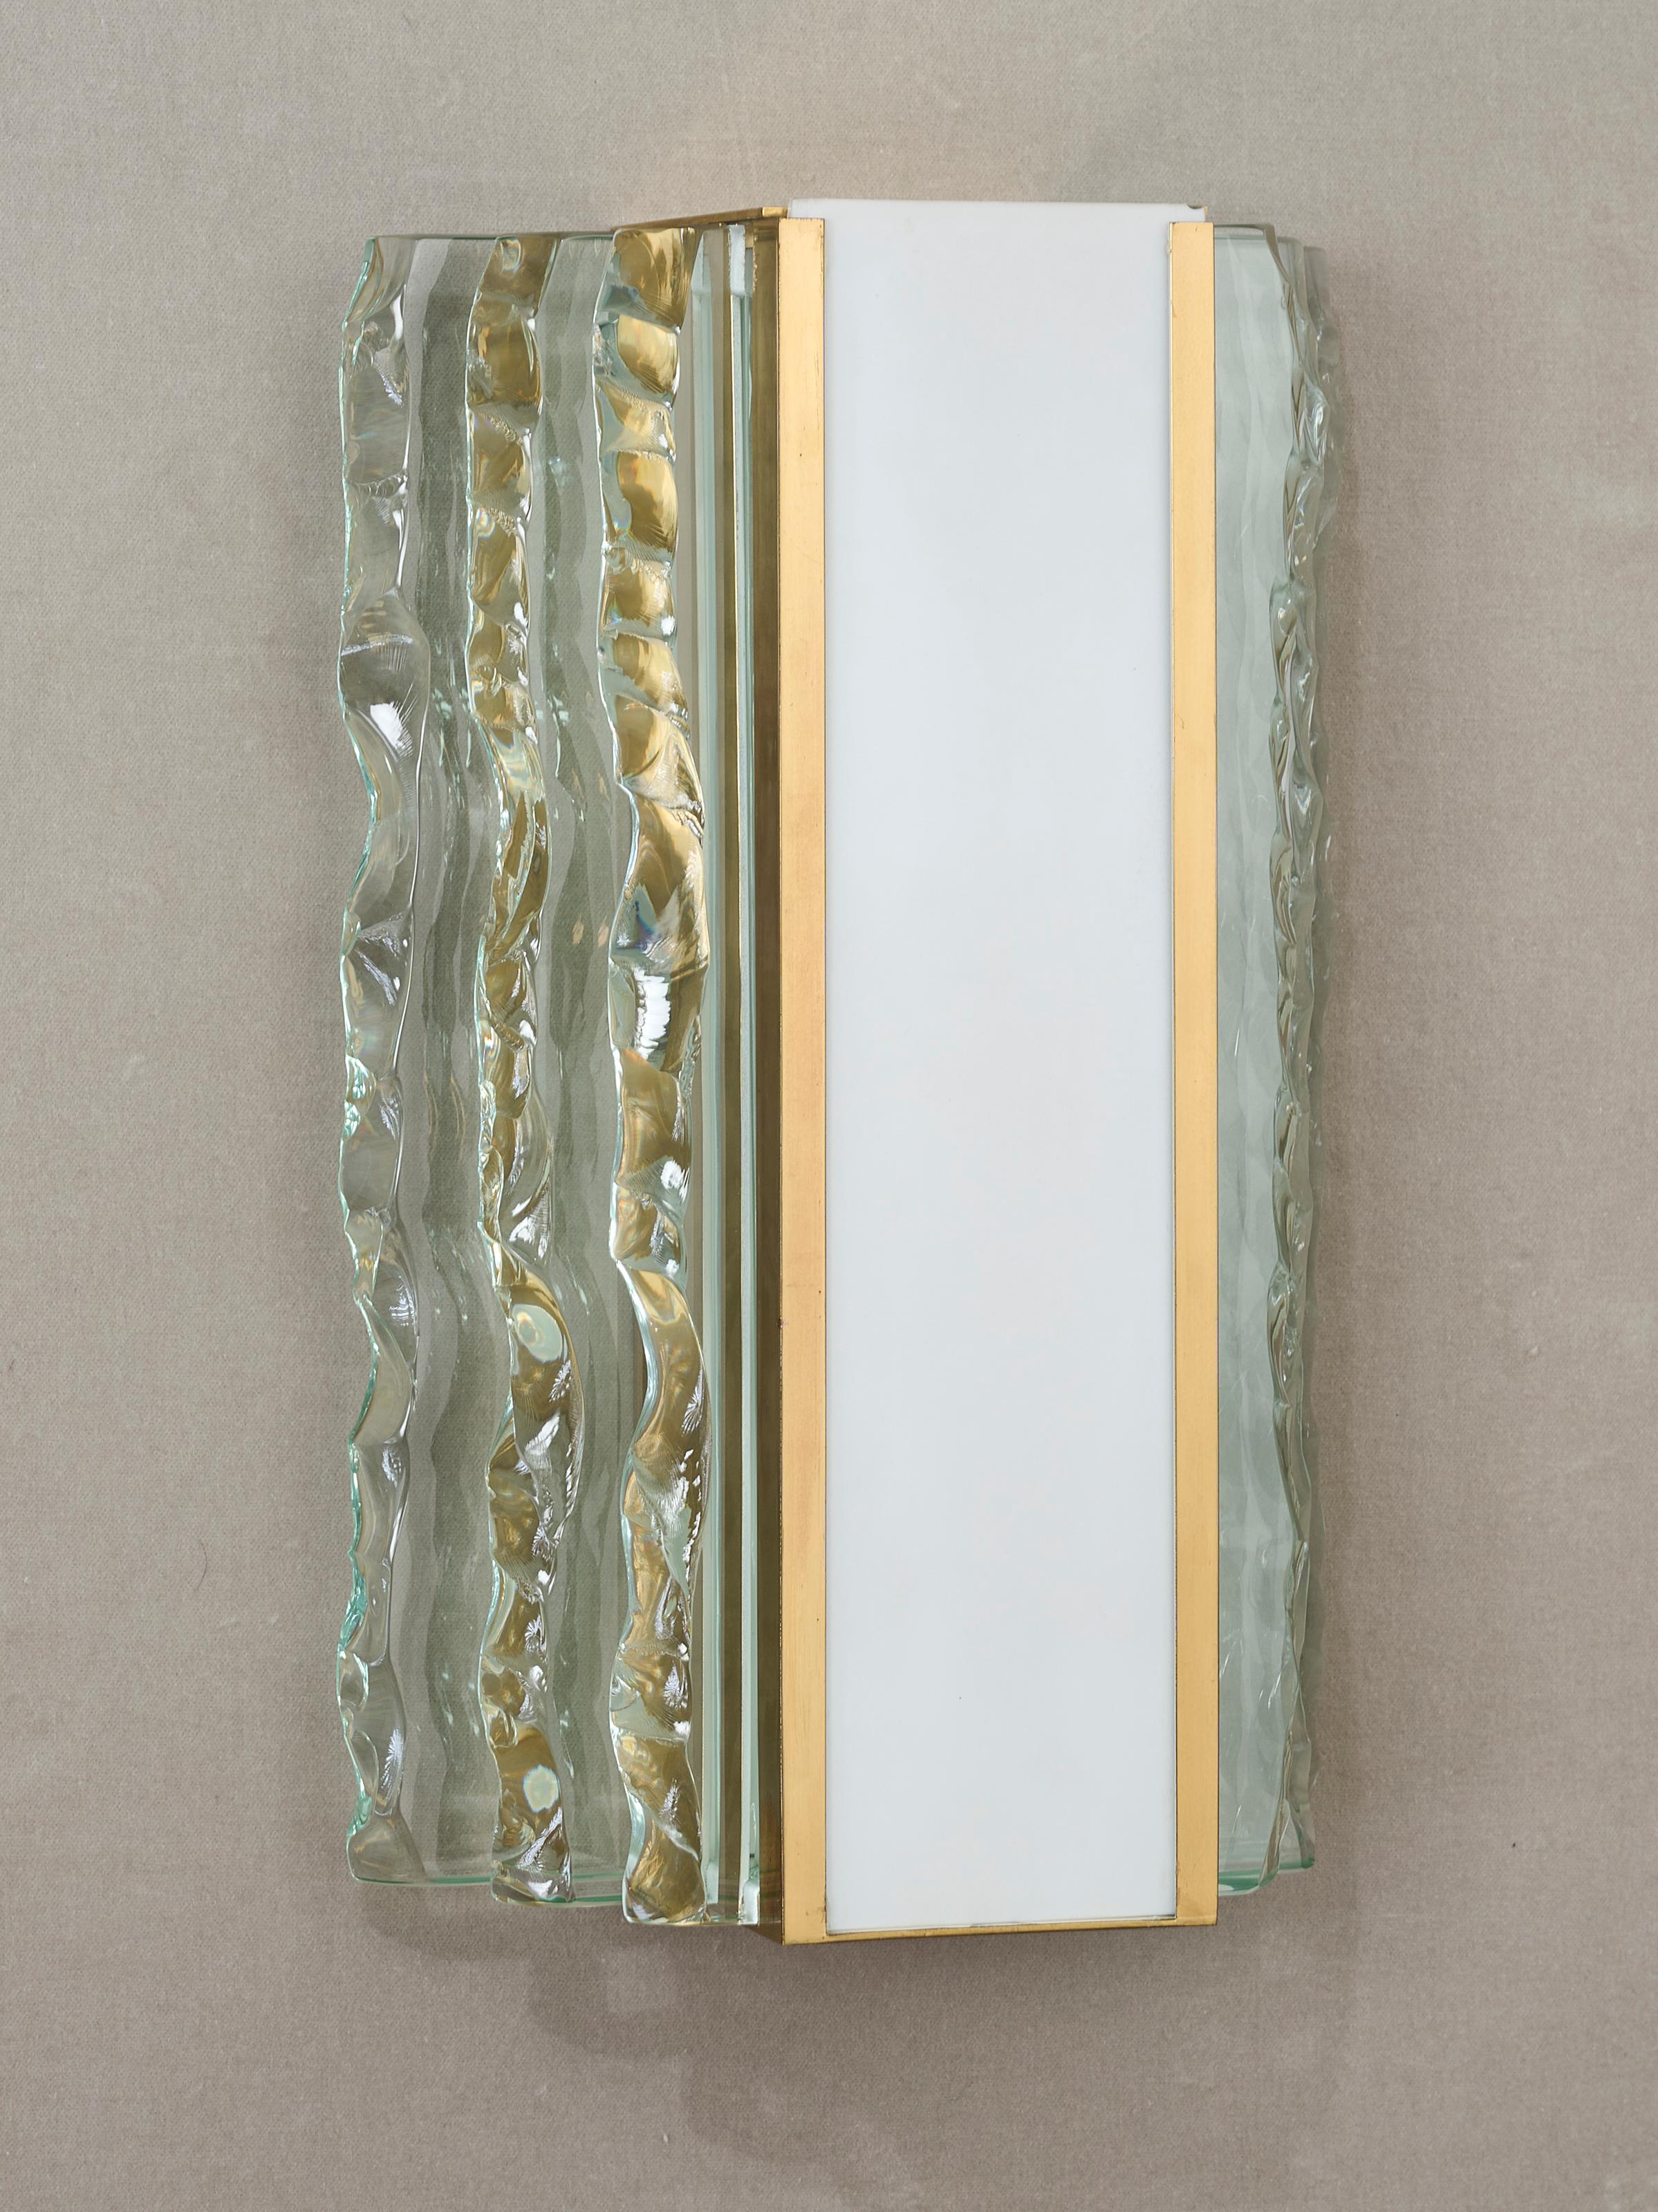 Max Ingrand for Fontana Arte: Pair of Cut Crystal and Brass Sconces, Italy 1954 For Sale 3